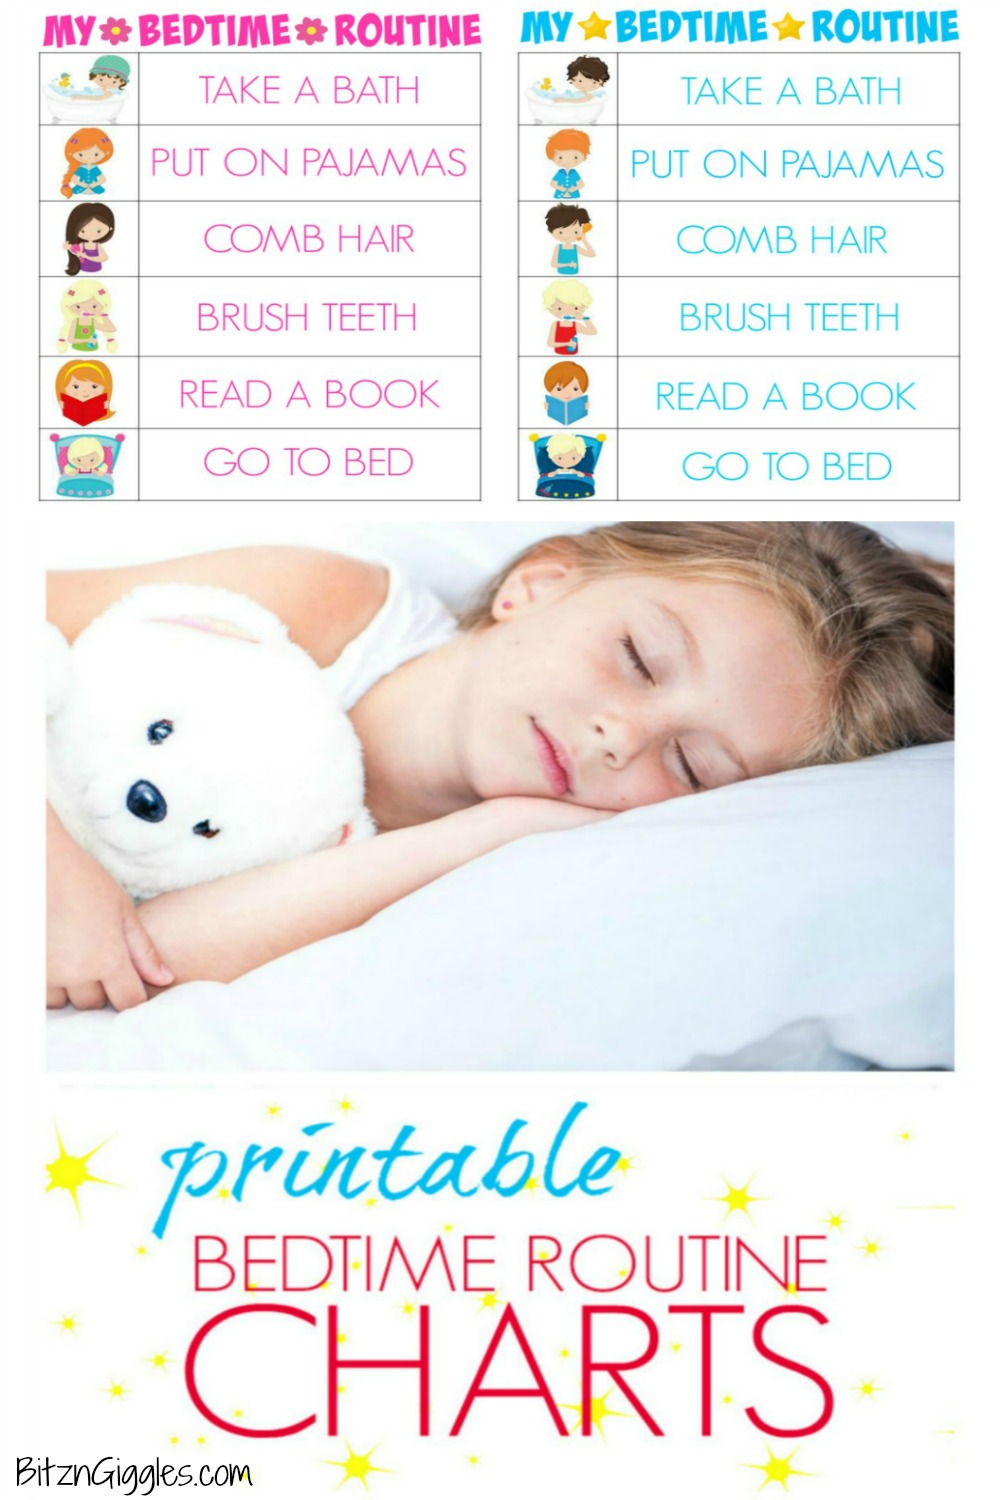 Printable Bedtime Routine Charts - Free printable kids bedtime routine charts to help teach kids independence and provide guidance for their evening routine! Charts for boys and girls!